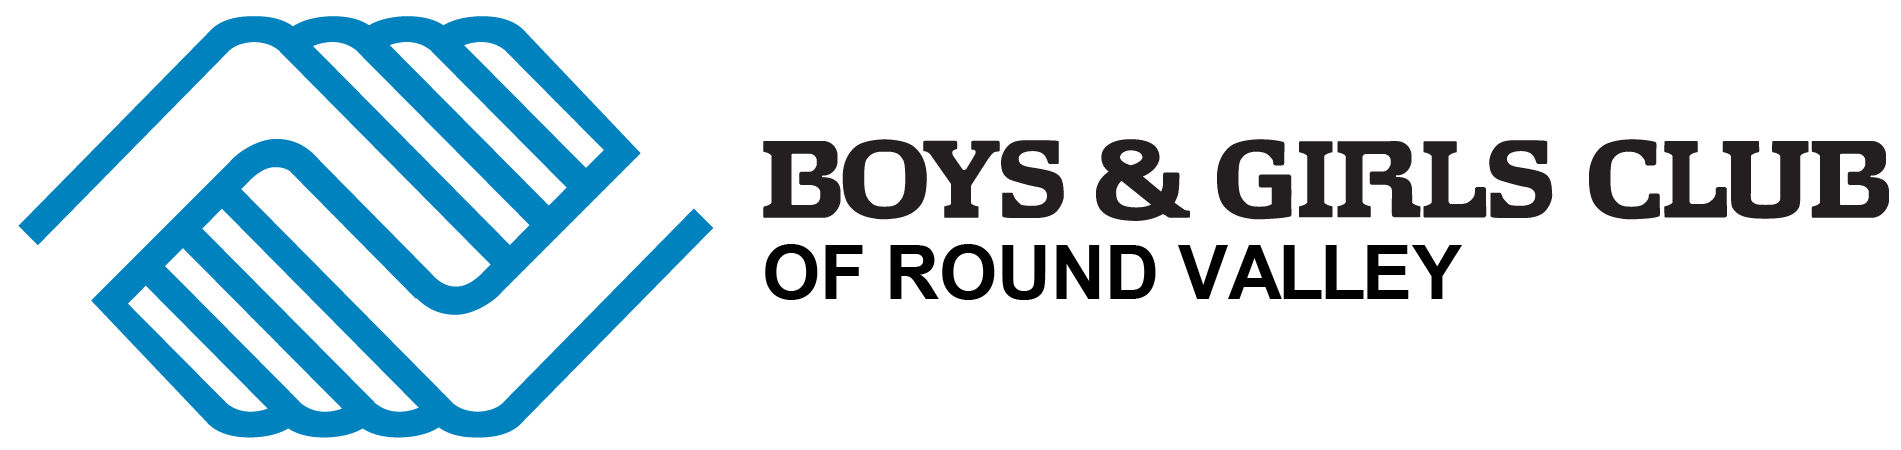 Boys and Girls Club of Round Valley logo